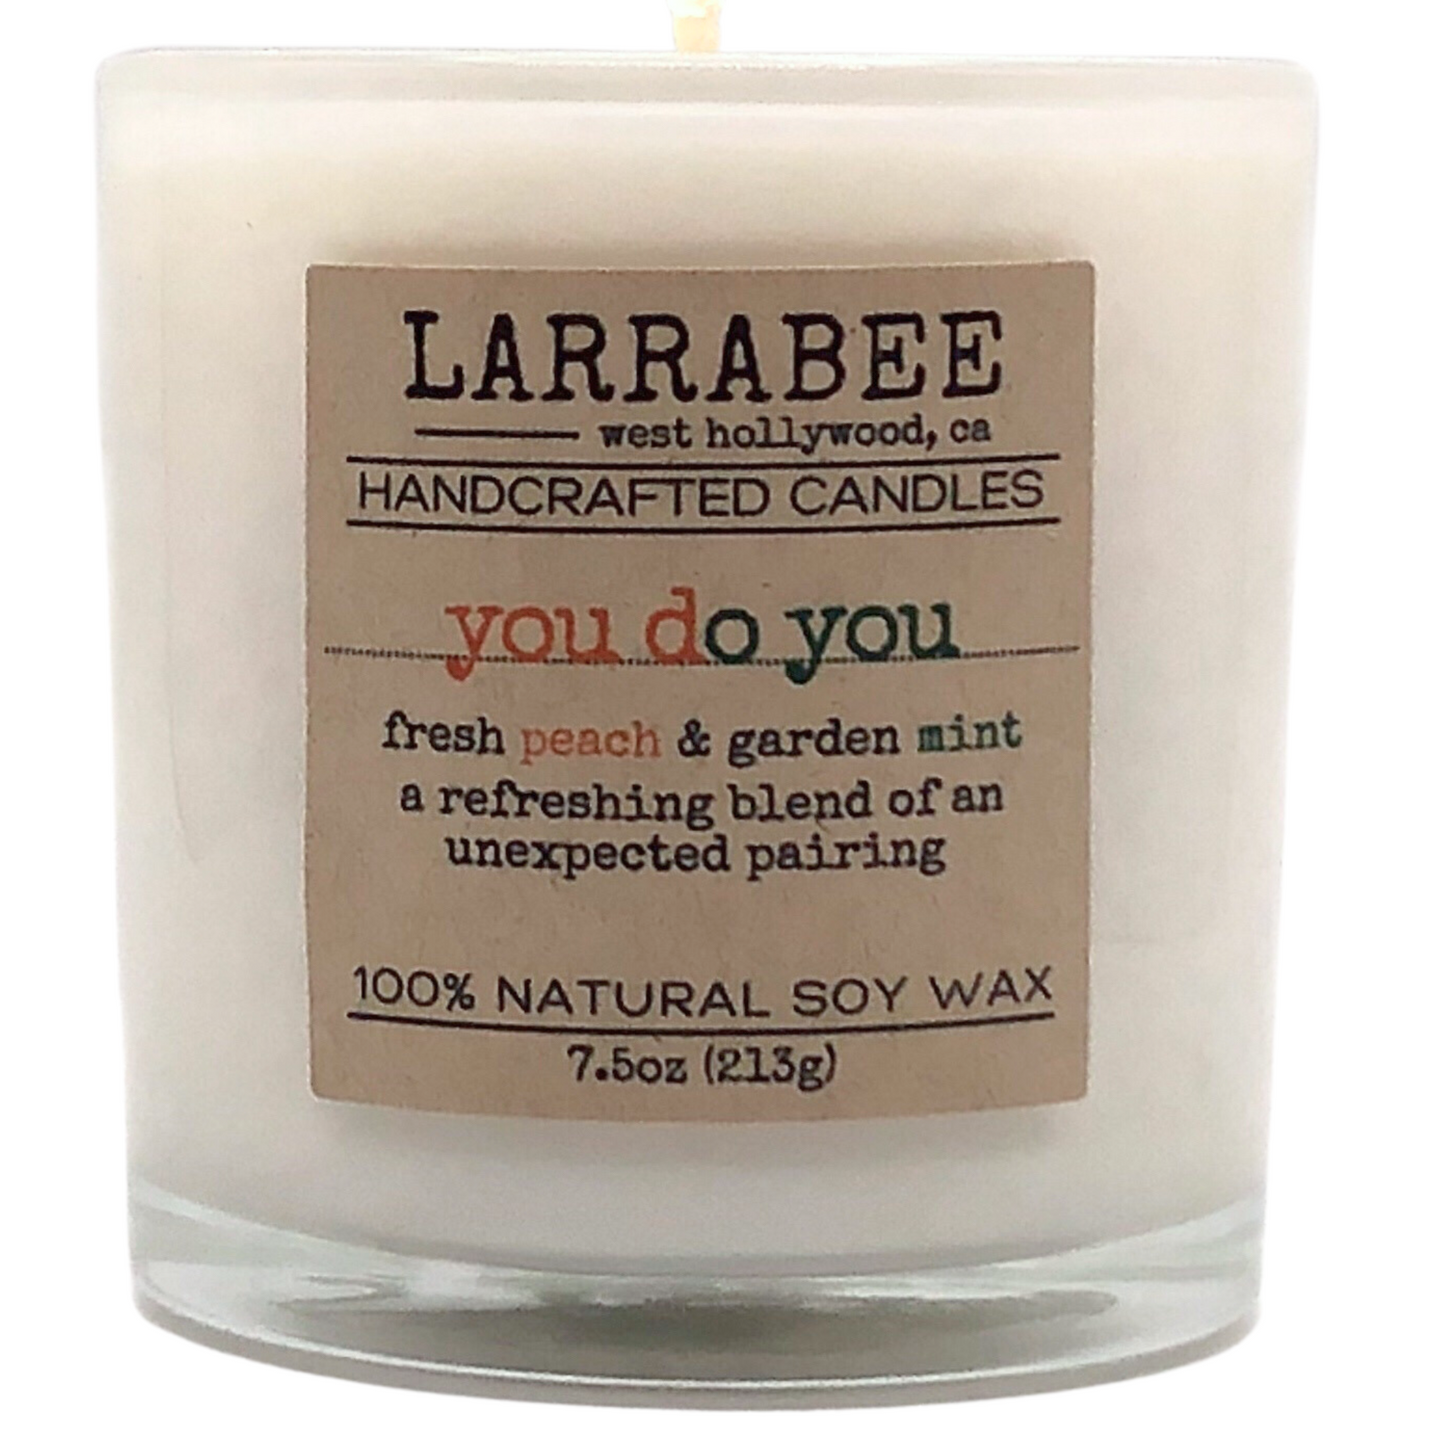 You Do You handcrafted candle